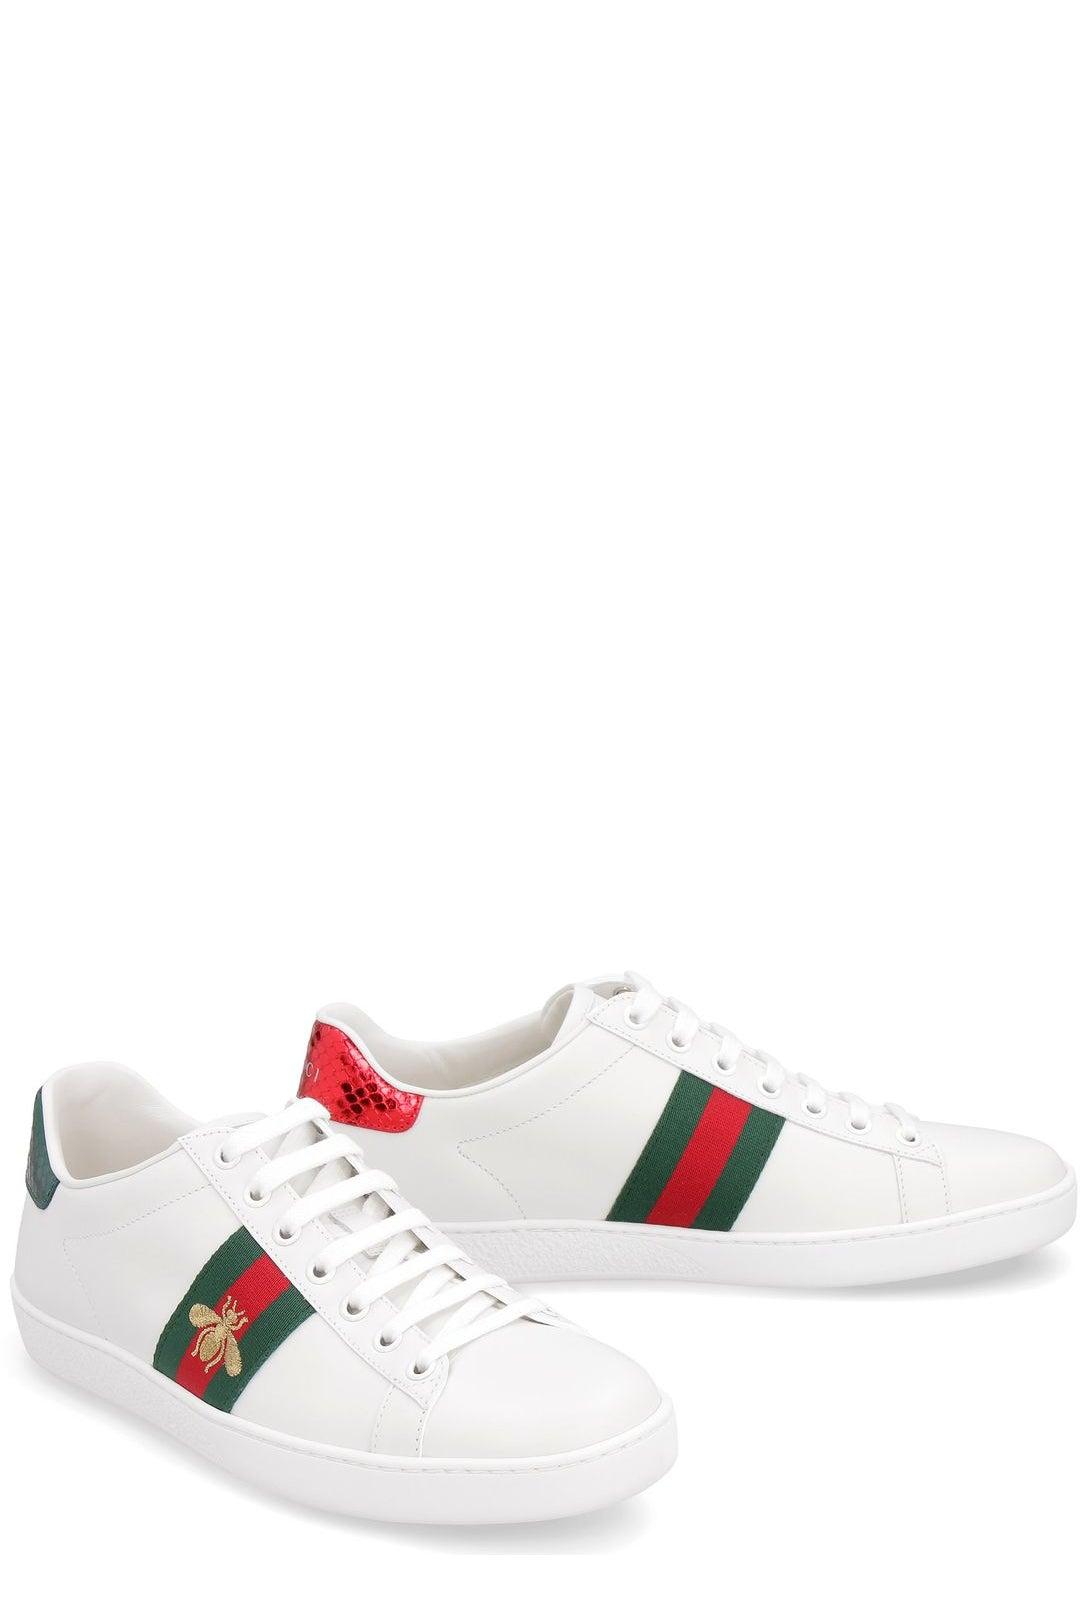 Gucci Leather New Ace Bee Embroidered Sneakers in White - Save 34% - Lyst